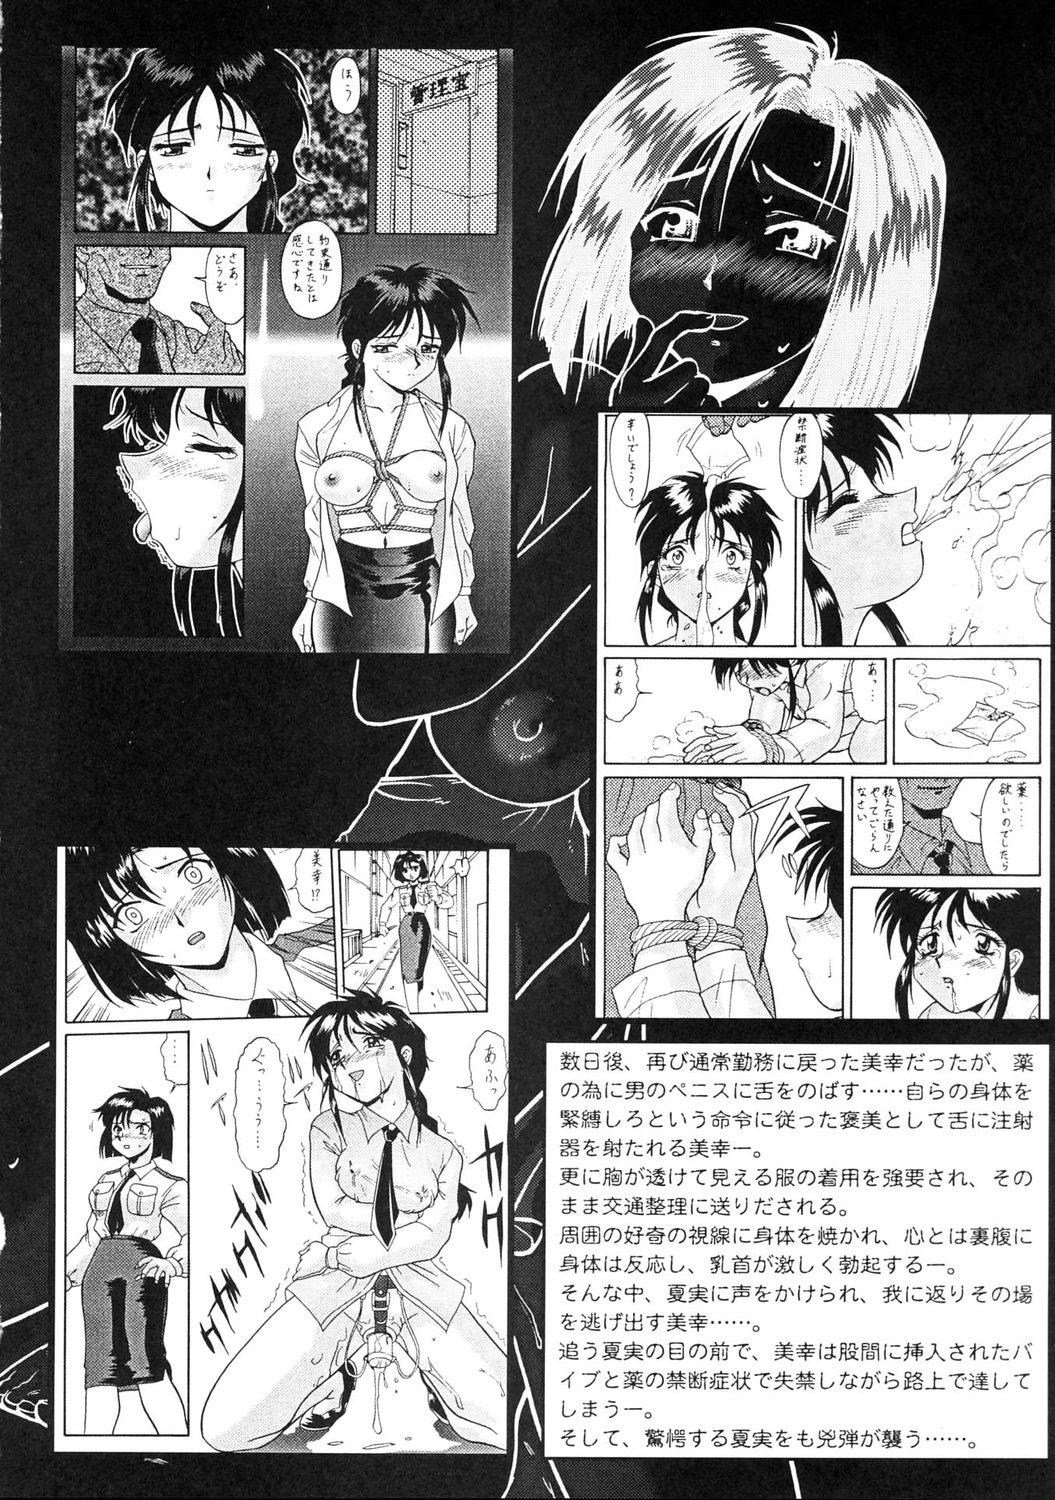 Ass Sex Taiho Shichauzo The Doujin Vol. 5 - Youre under arrest Thai - Page 5